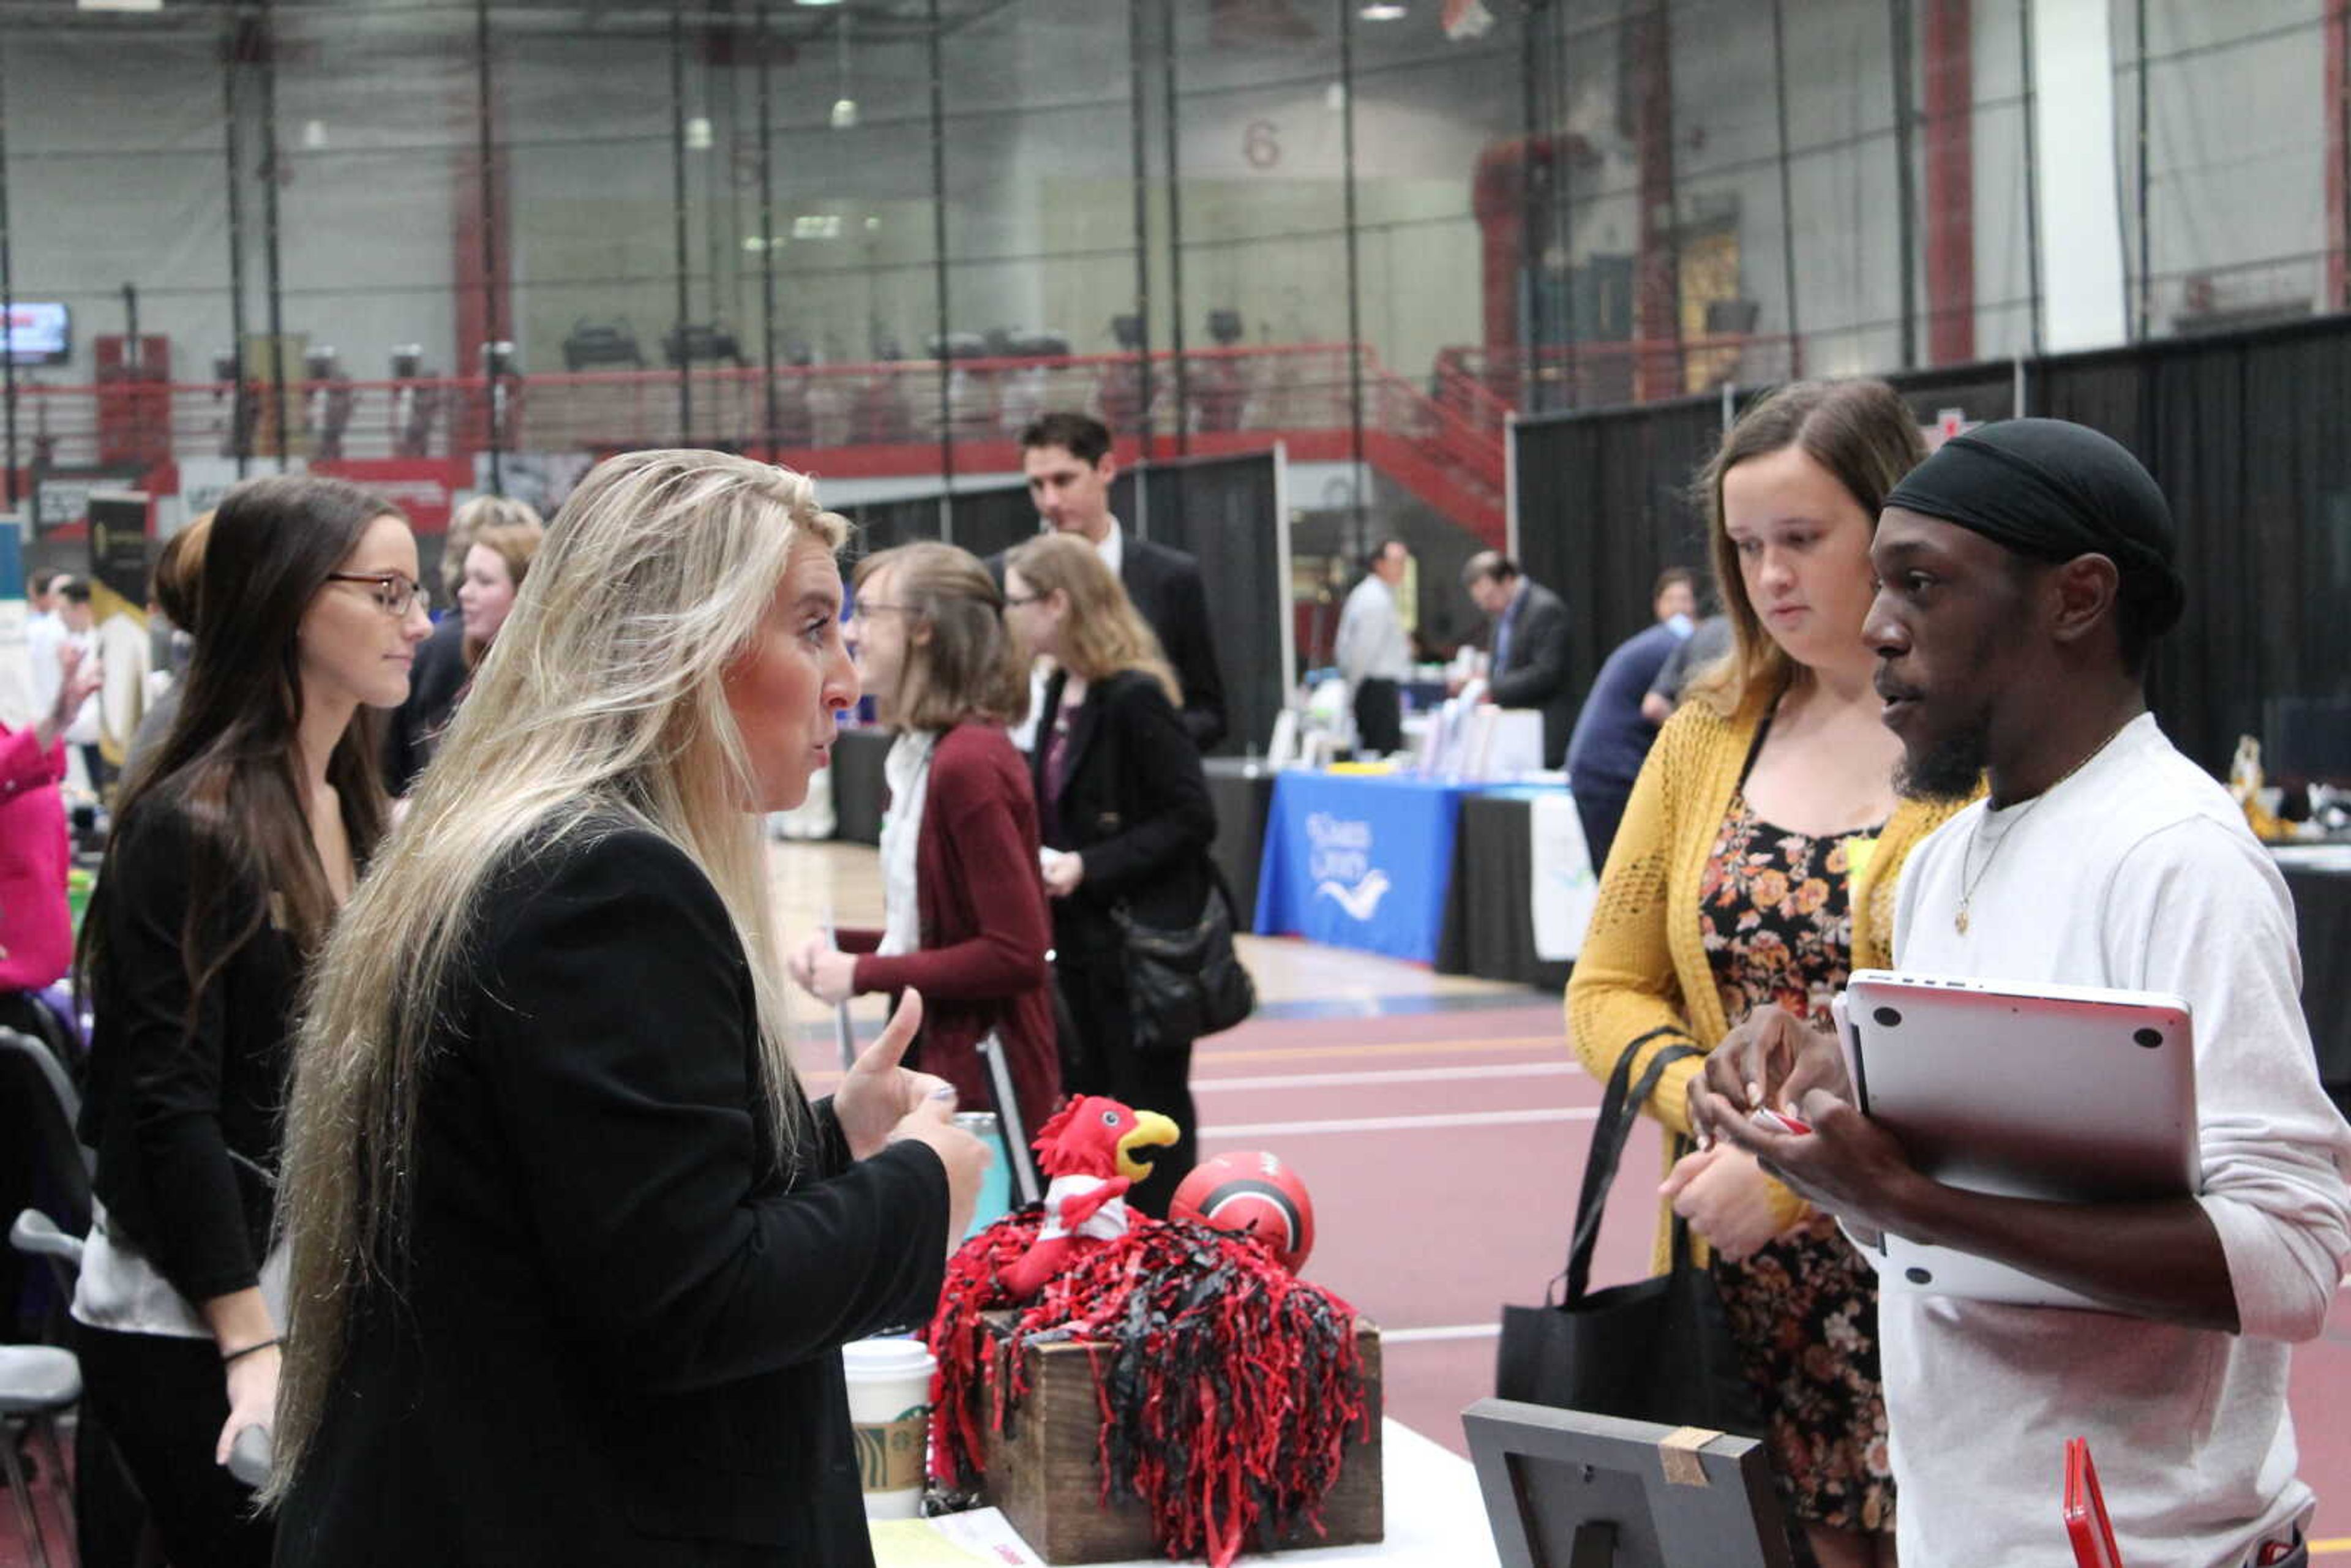 Southeast students Martin Woods and Danielle Thiemp talk with Alicia Ticer, Director of Marketing and Student engagement at Chartwells during Southeast's Fall Career Expo at the Show Me Center on Thursday Oct. 10 in Cape Girardeau, Missouri.